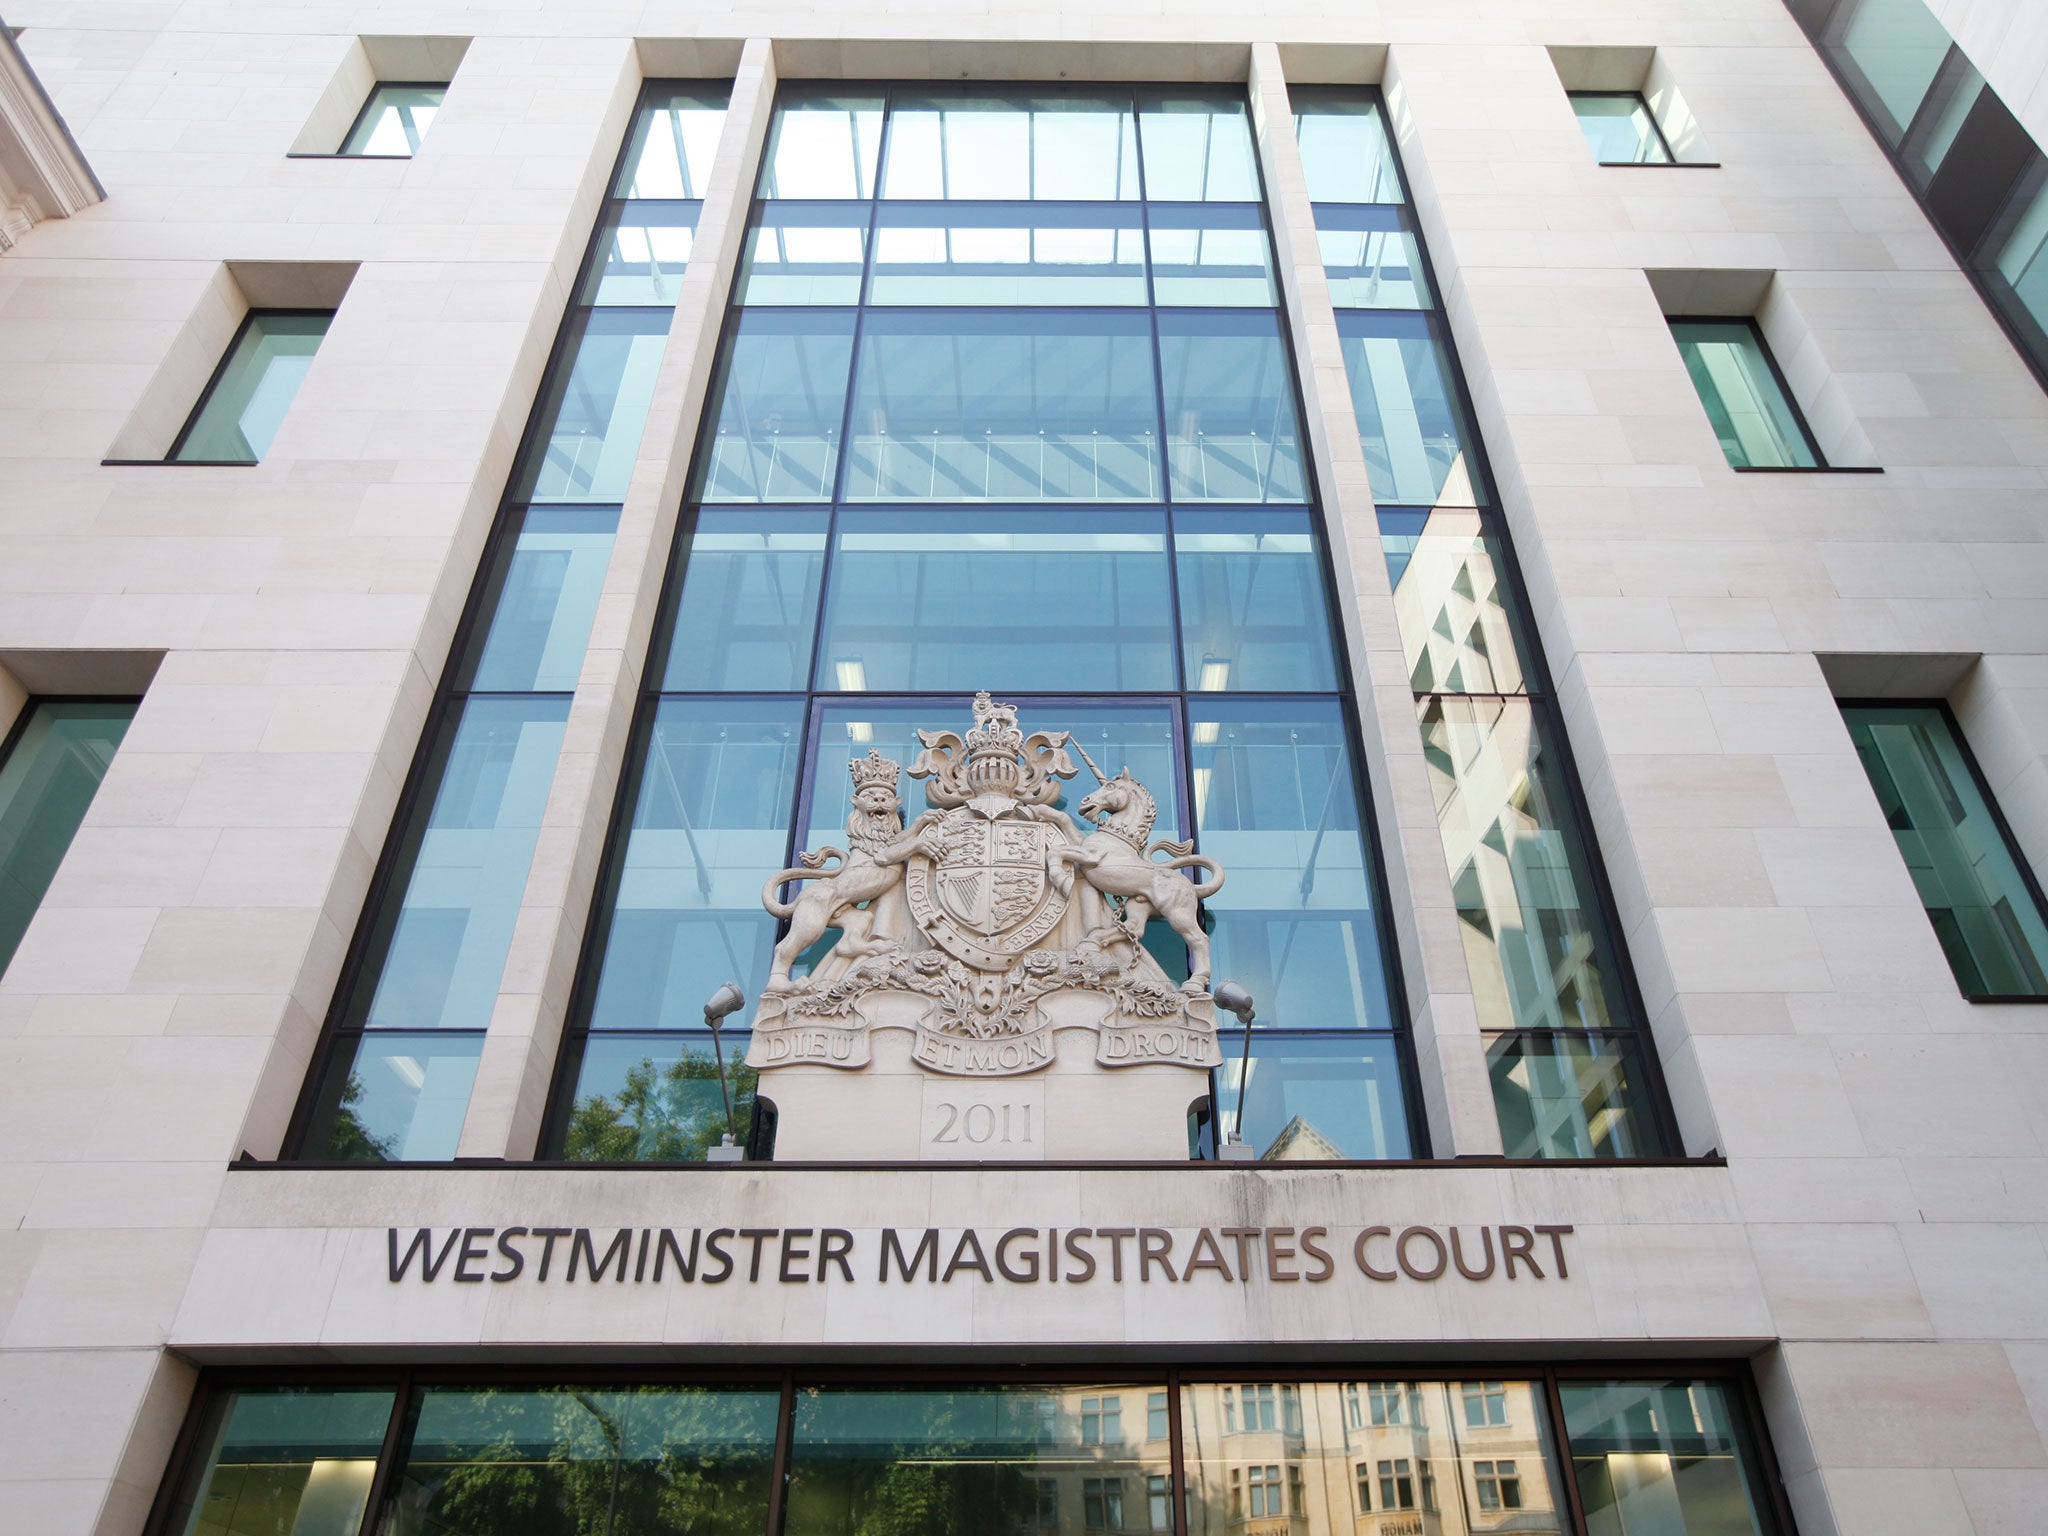 Mohammed Ammer Ali is to appear at Westminster Magistrates' tomorrow